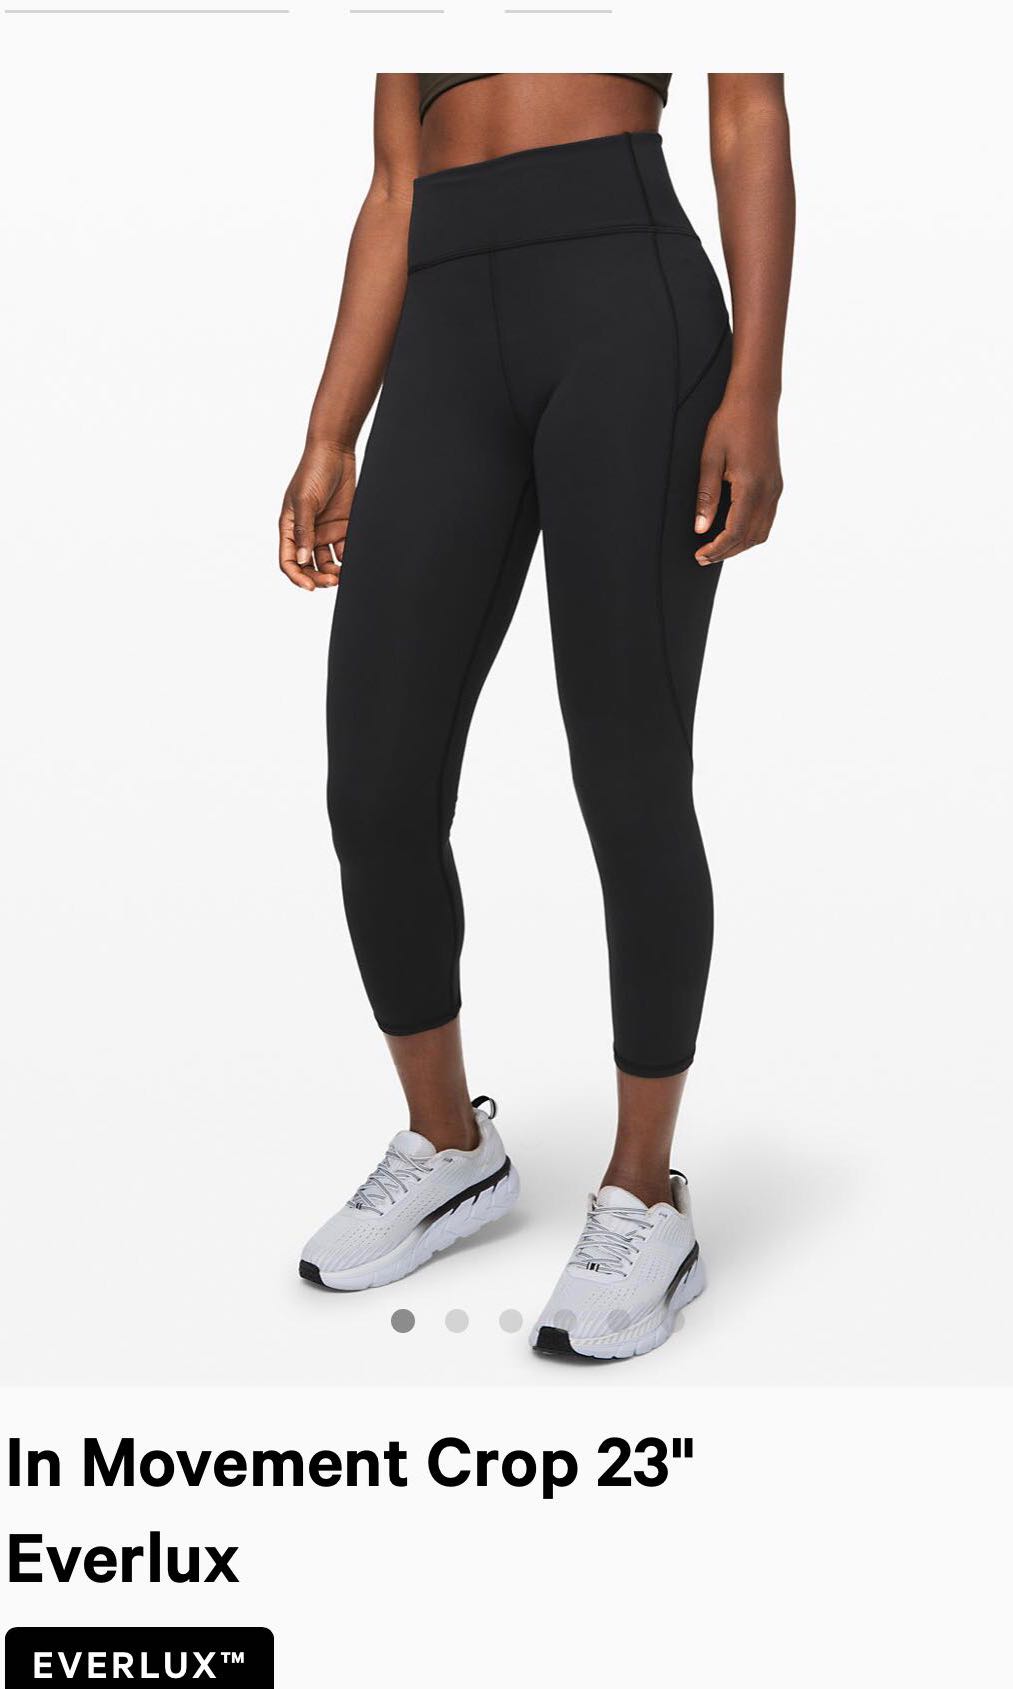 In movement tight 23” lululemon black size 4 everlux (NFS atm), Women's  Fashion, Activewear on Carousell